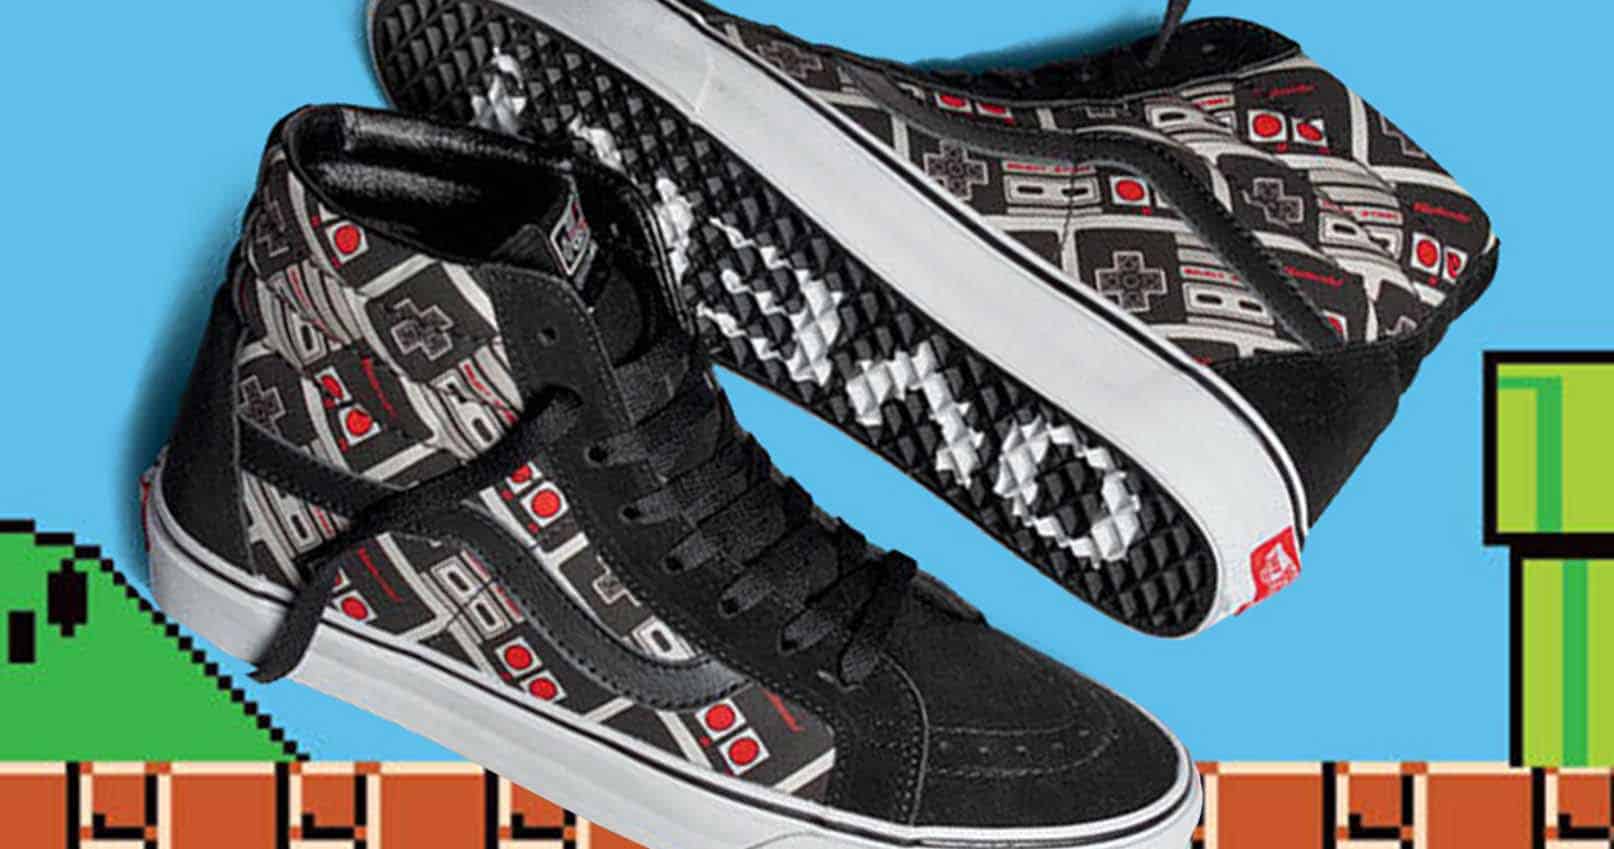 NES Game Over Vans Shoes - Shut Up And 